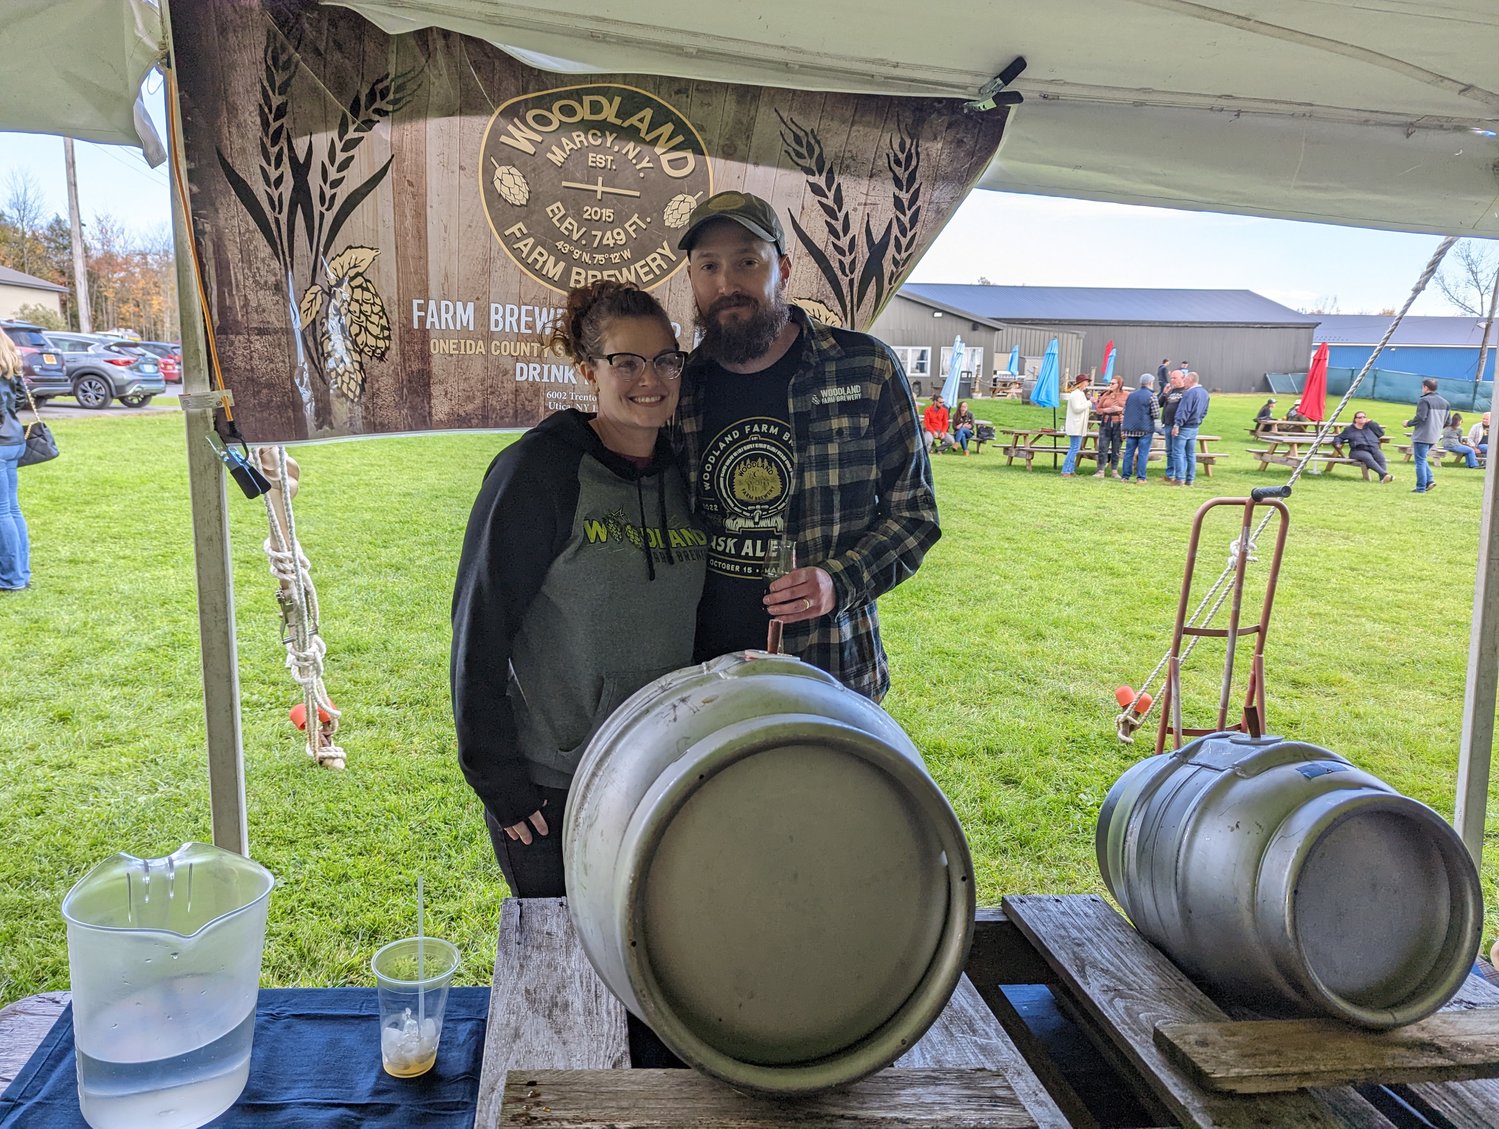 Keith Redhead, and his wife, Katie, are owners and operators of Woodland Farm Brewery on Trenton Road in Marcy. They have hosted the Cask Ale Fest for seven years, inviting local breweries from Oneida County and across New York to celebrate cask ale.